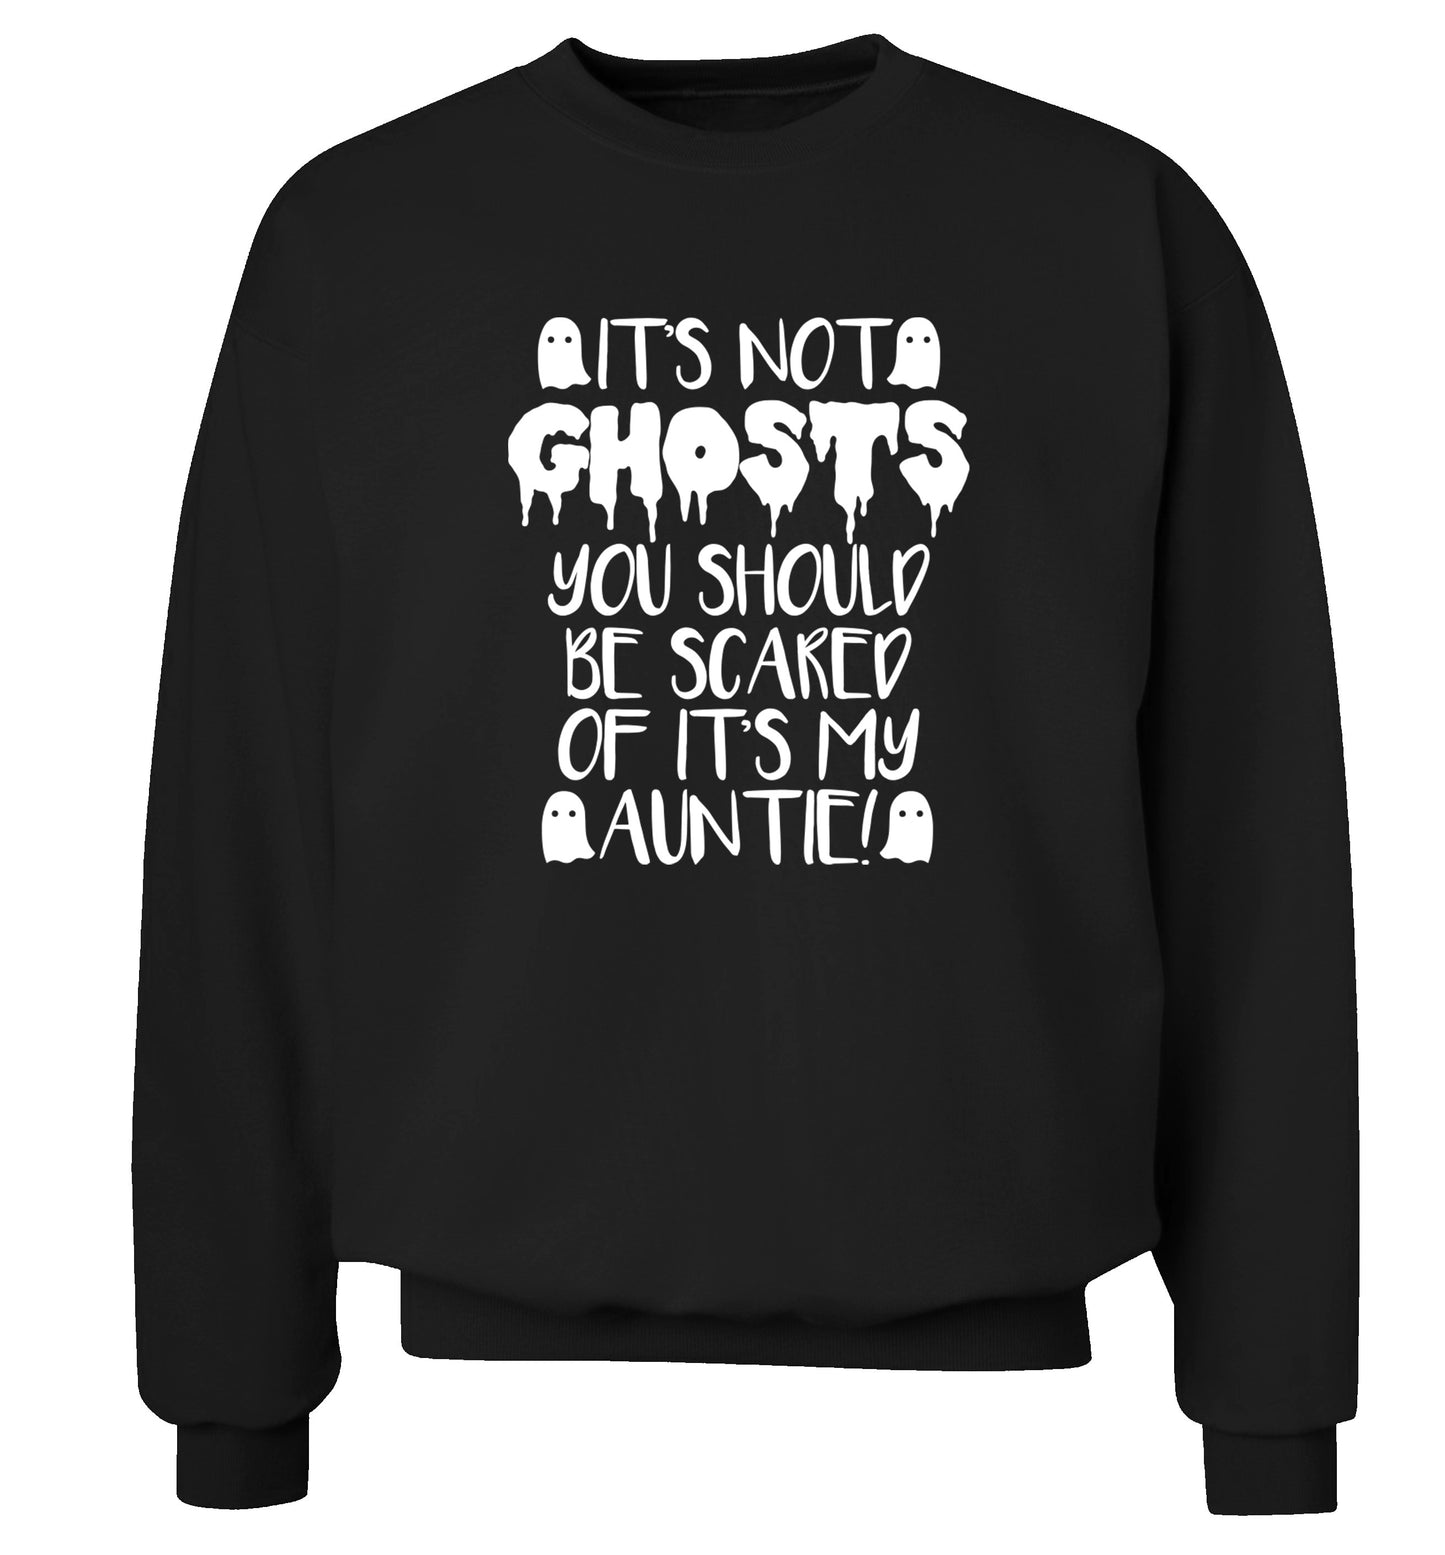 It's not ghosts you should be scared of it's my auntie! Adult's unisex black Sweater 2XL